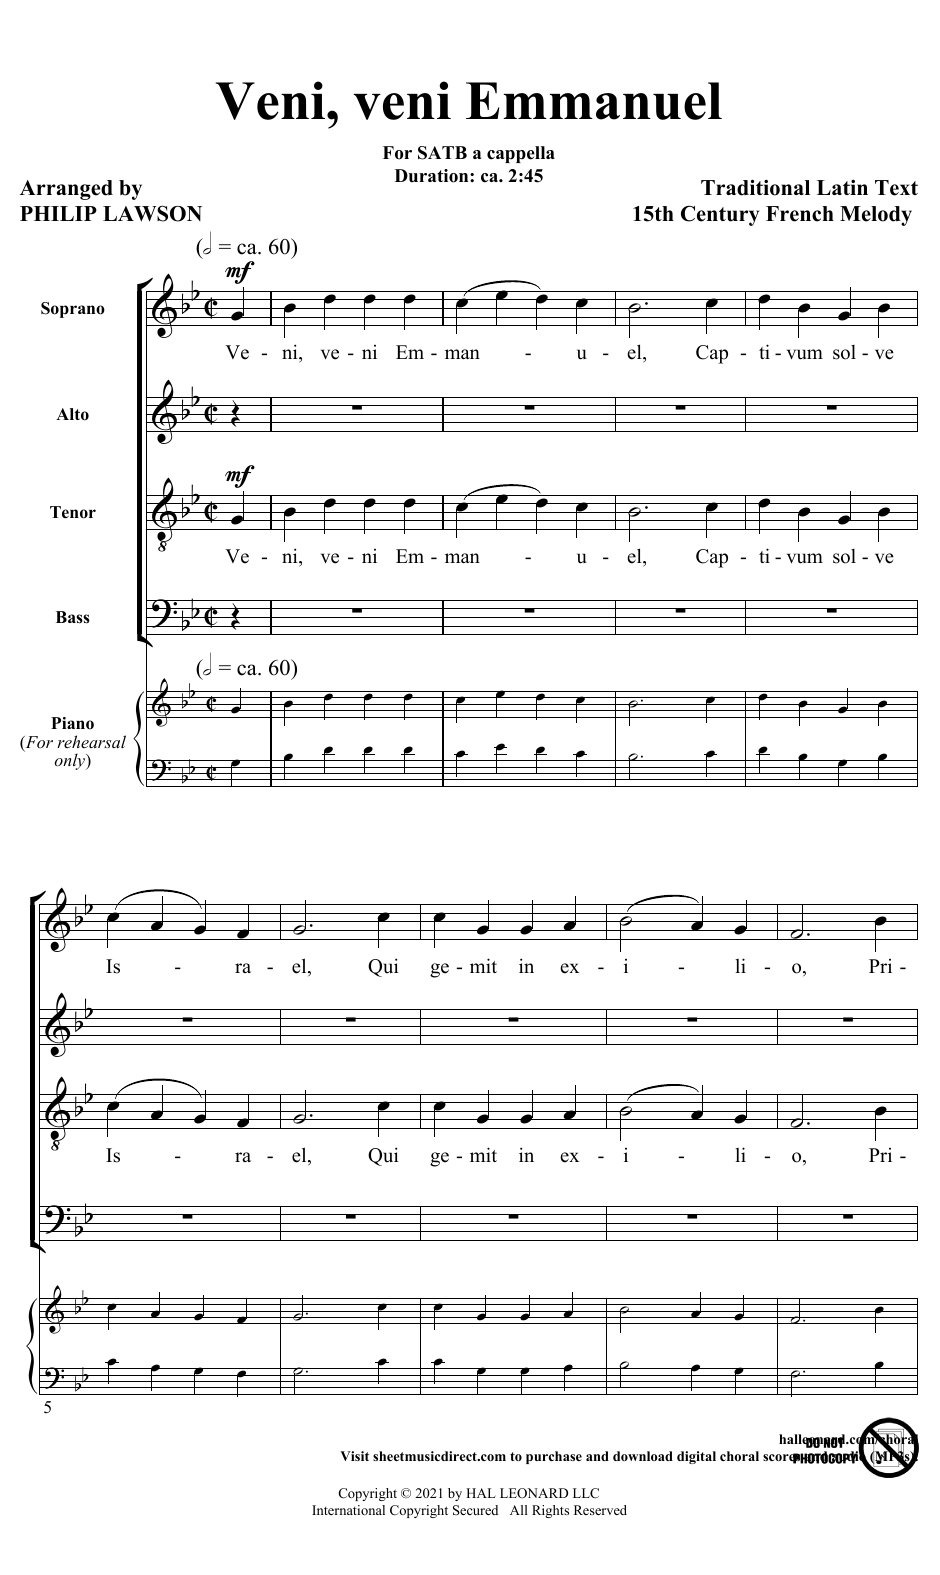 15th Century French Melody Veni, Veni Emmanuel (arr. Philip Lawson) sheet music notes and chords. Download Printable PDF.